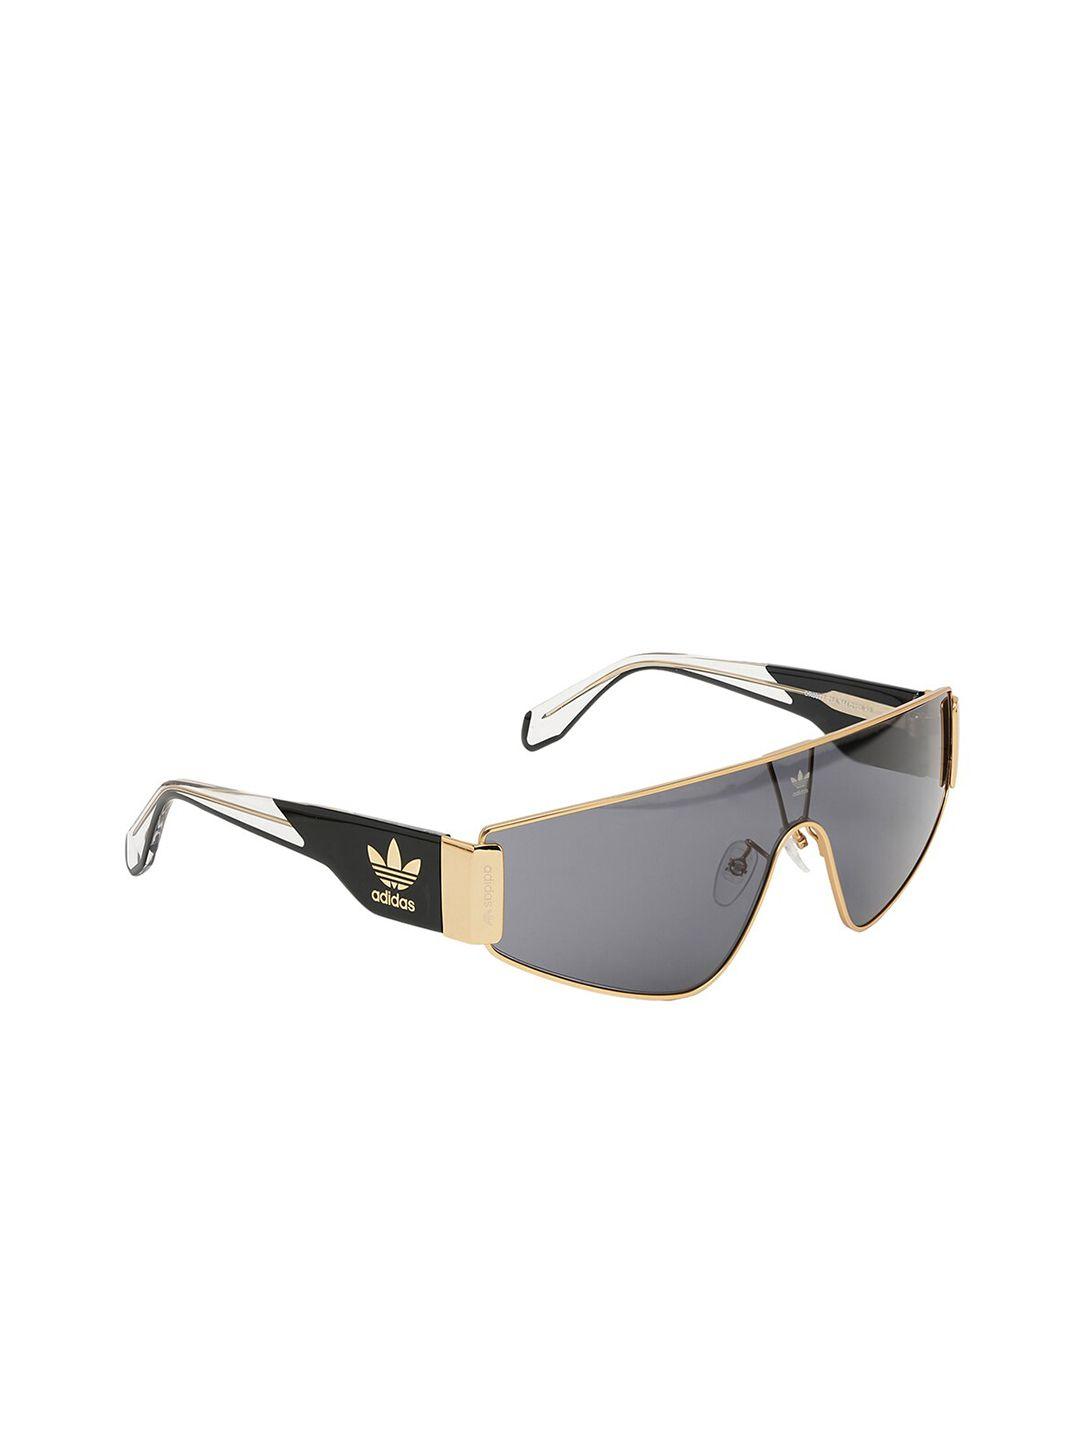 adidas-men-uv-protected-curved-shield-sunglasses-or0077-28a